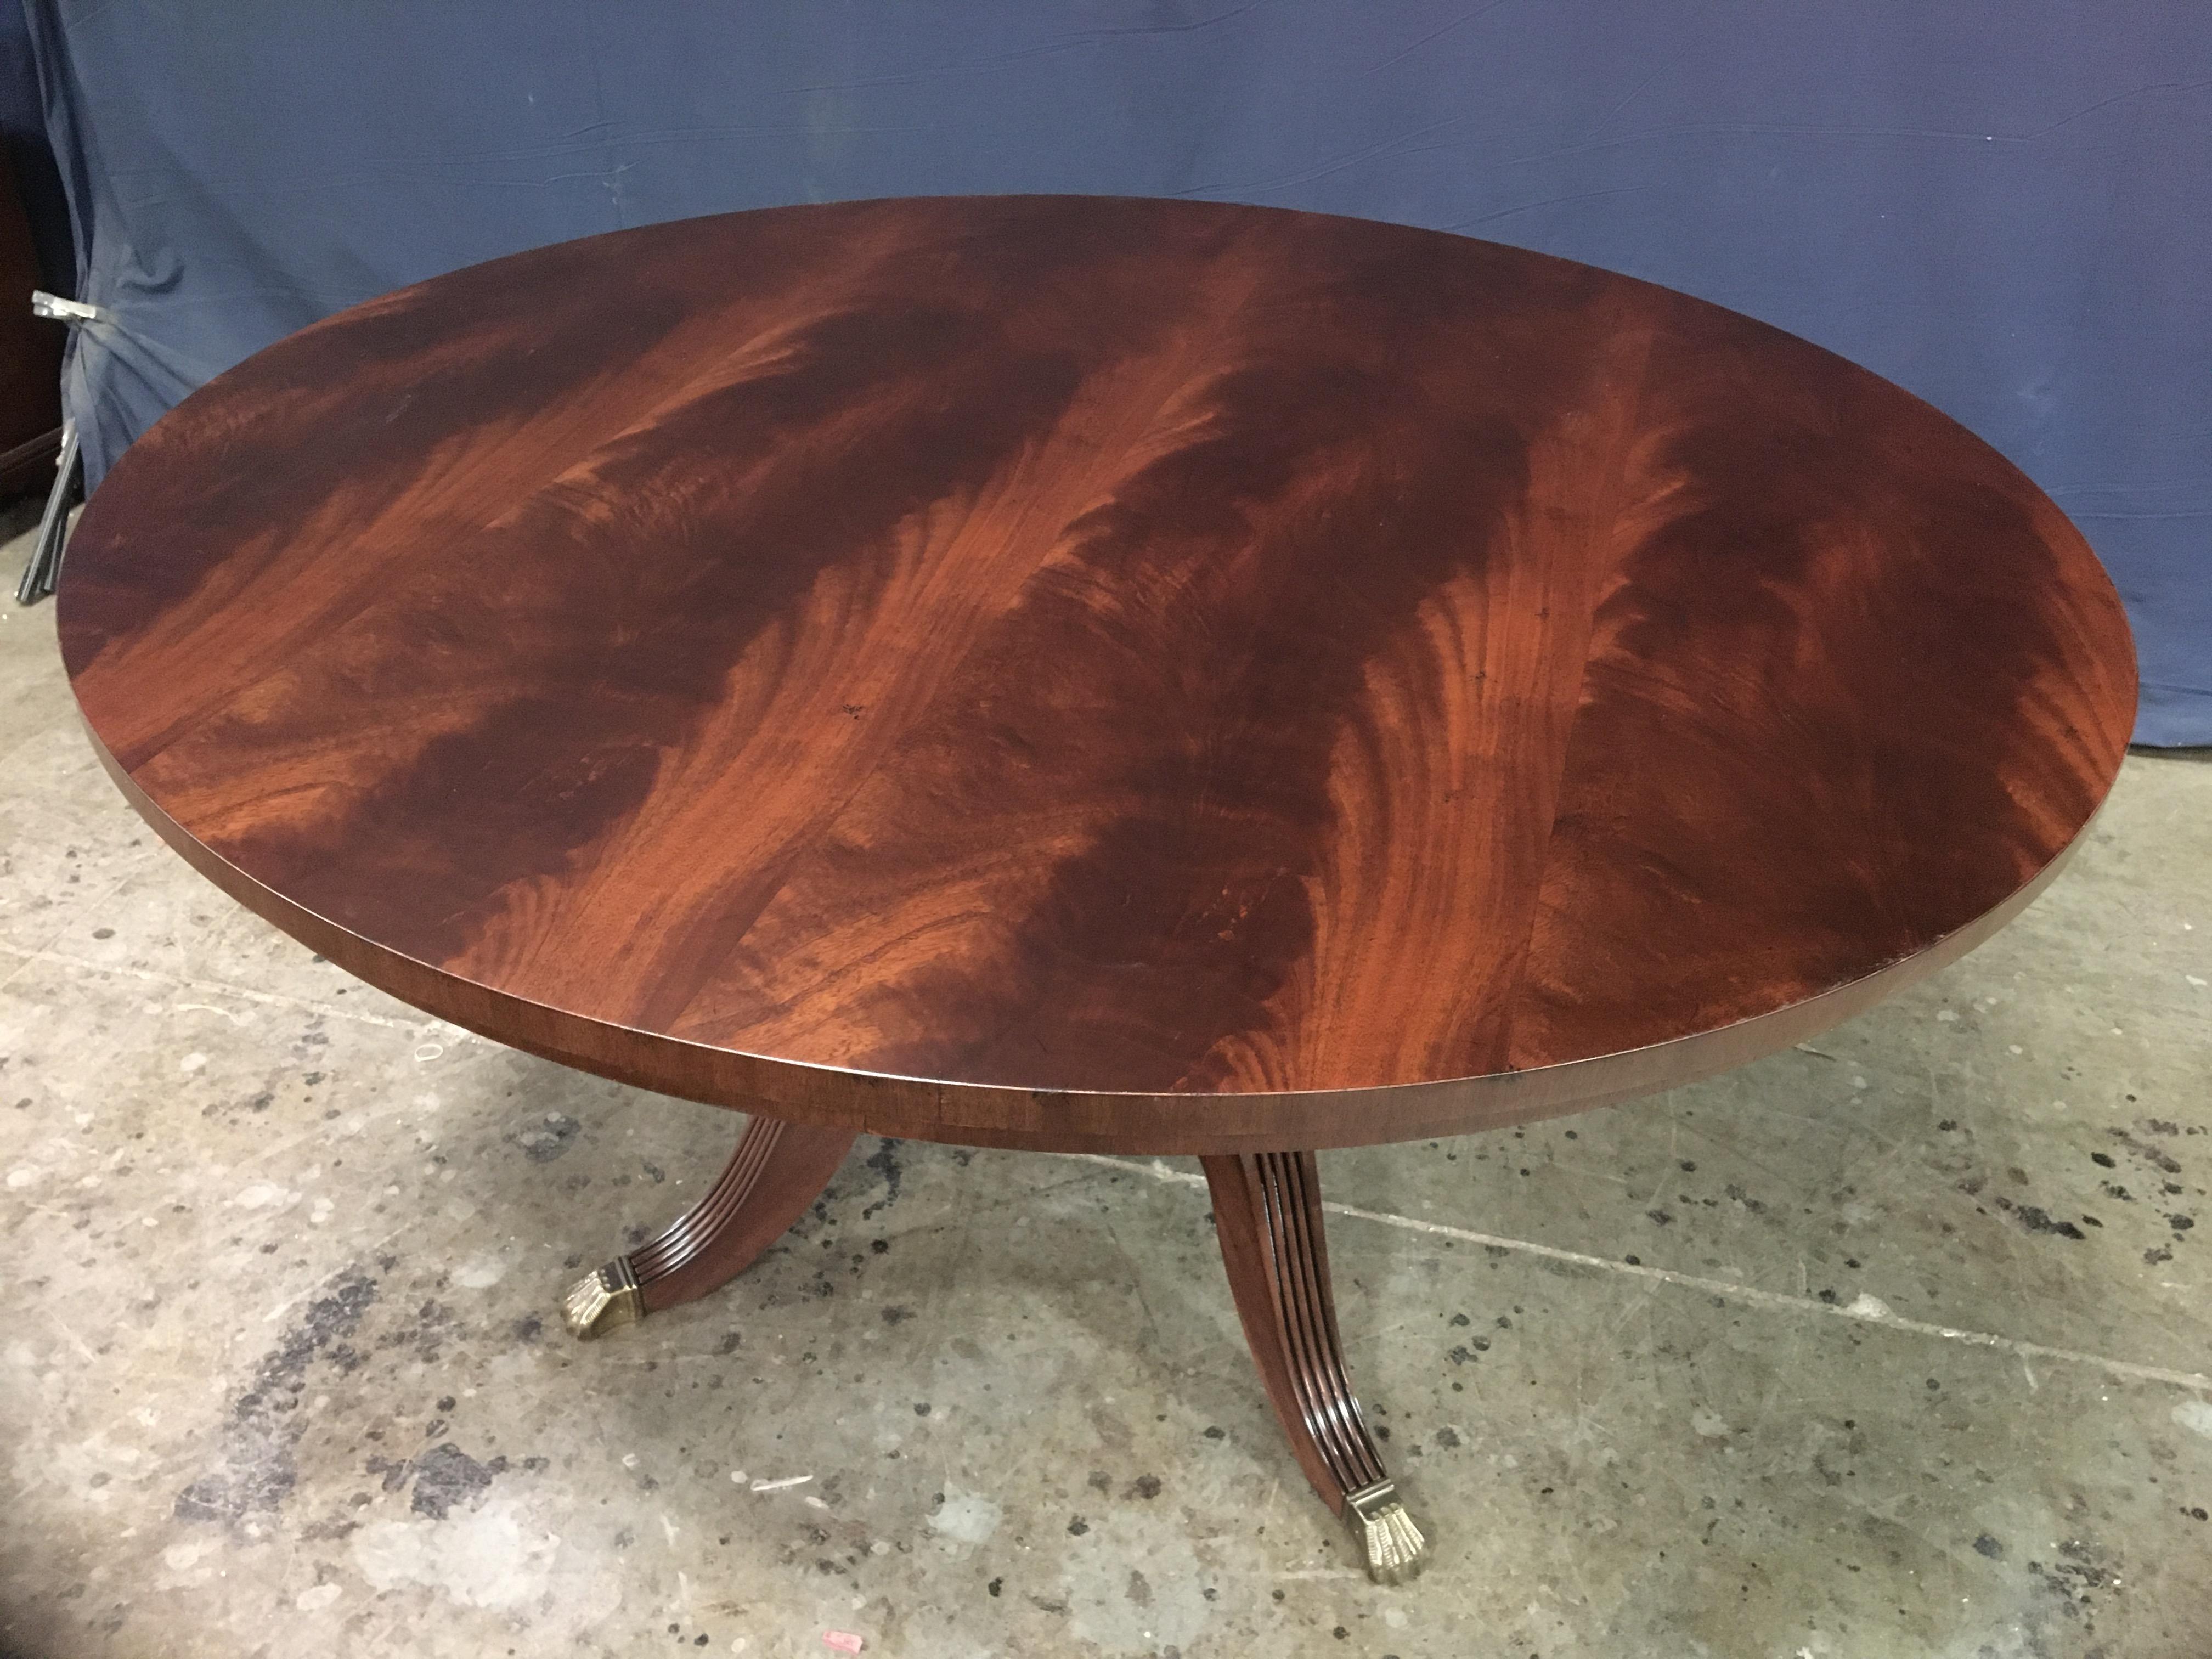 This is made-to-order round traditional mahogany dining table made in the Leighton Hall shop. It features field of slip-matched West African swirly crotch mahogany. The top has a satin finish with mild distressing which allows it to blend in with